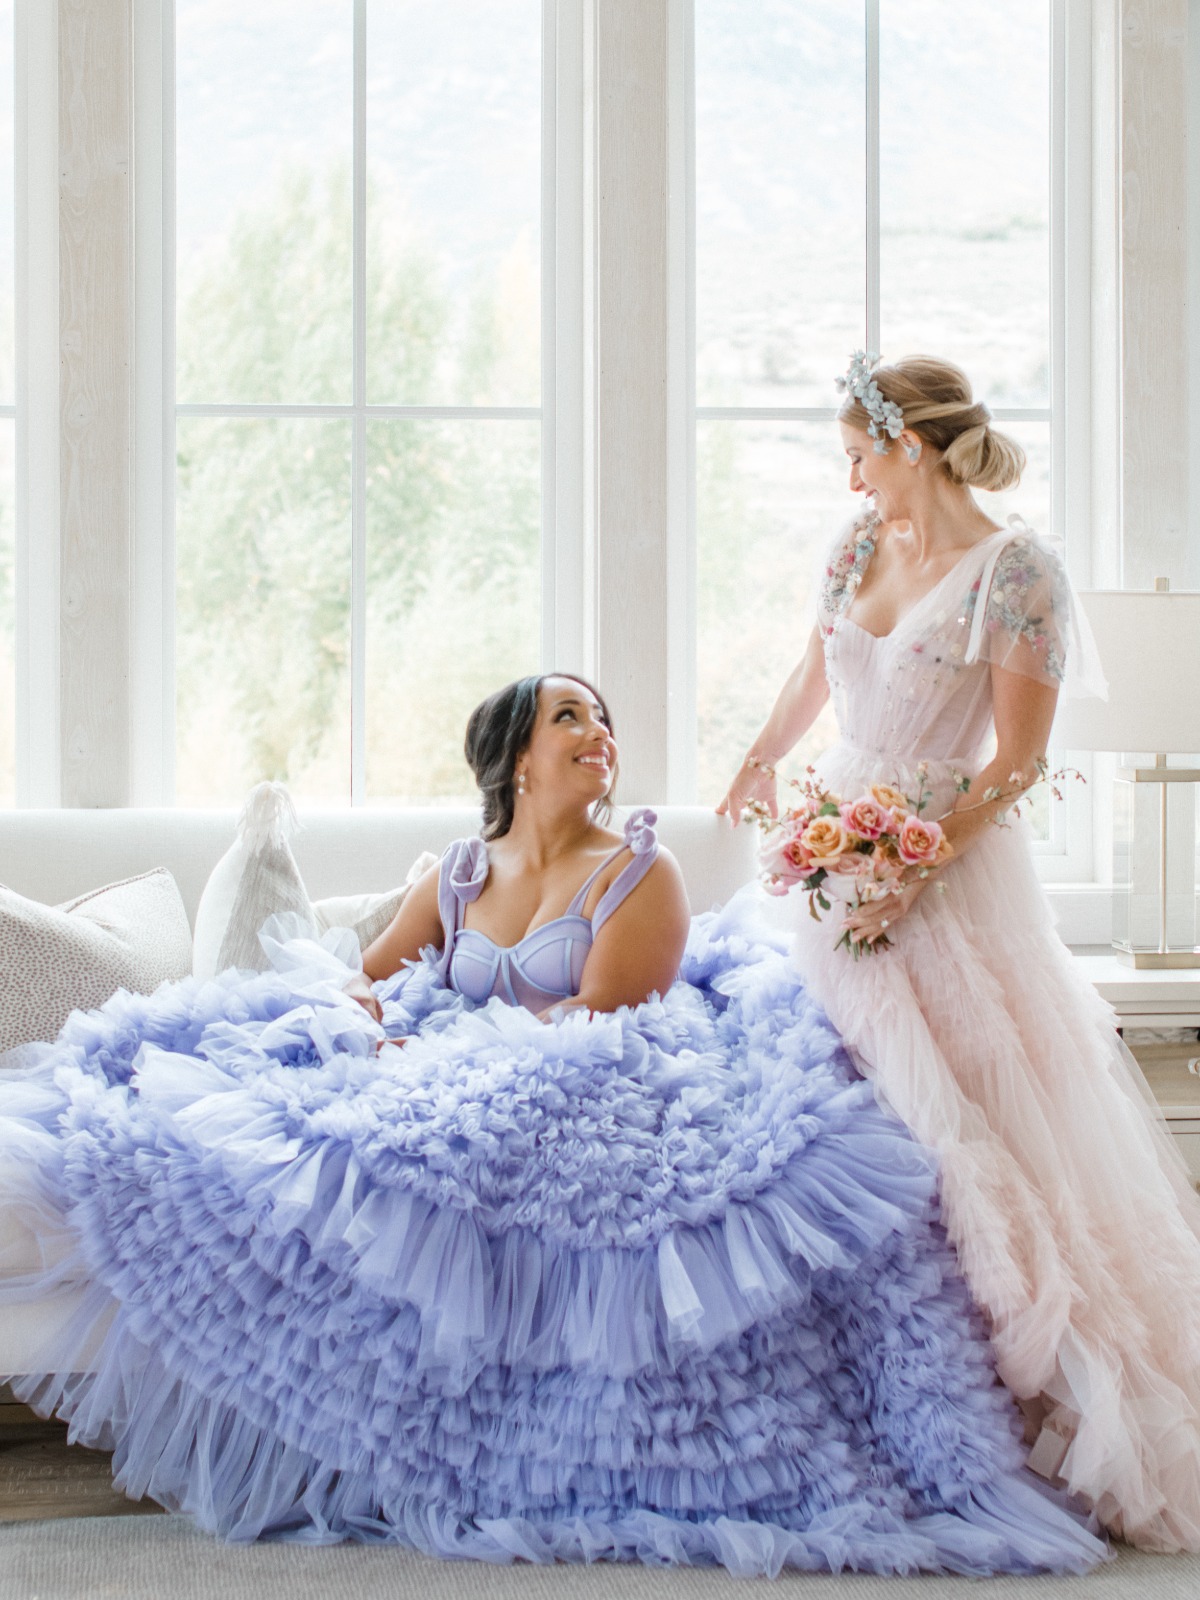 A Fun Fashion-Filled Inspiration Shoot For Every Bride's Style